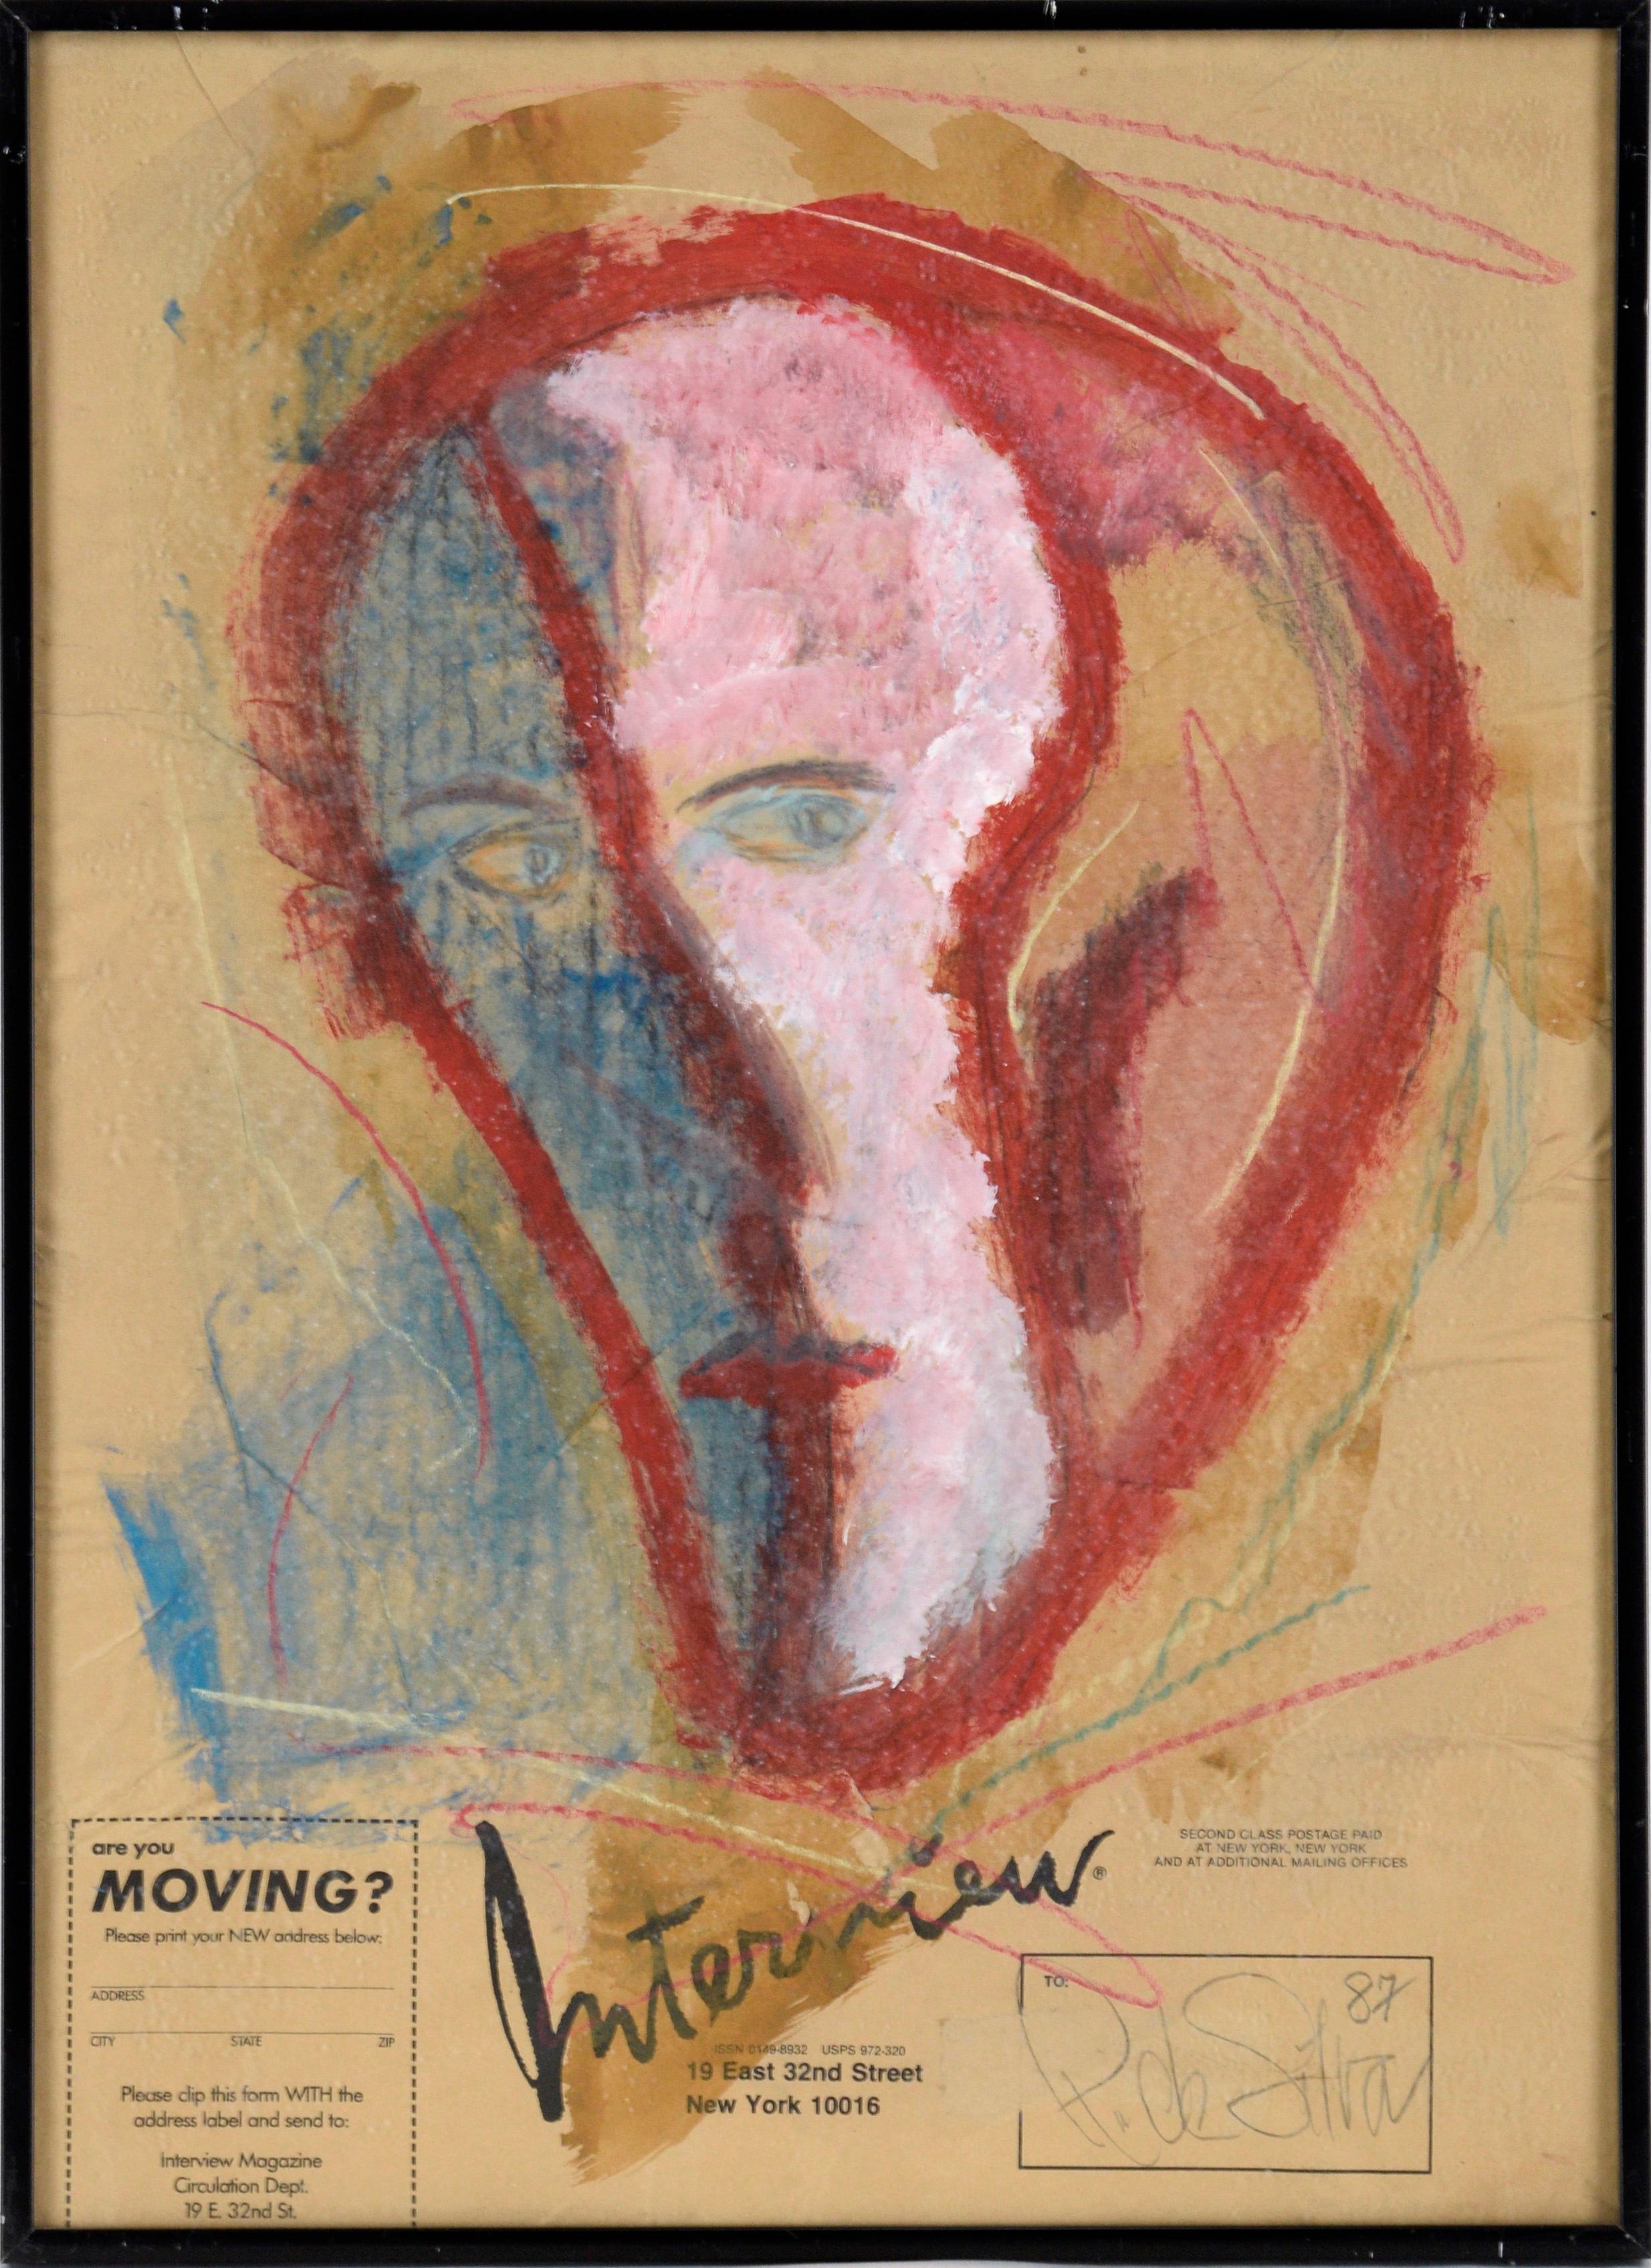 Ricardo de Silva Figurative Painting - Two Face Abstract on Wrapper of Interview Magazine in Acrylic on Paper